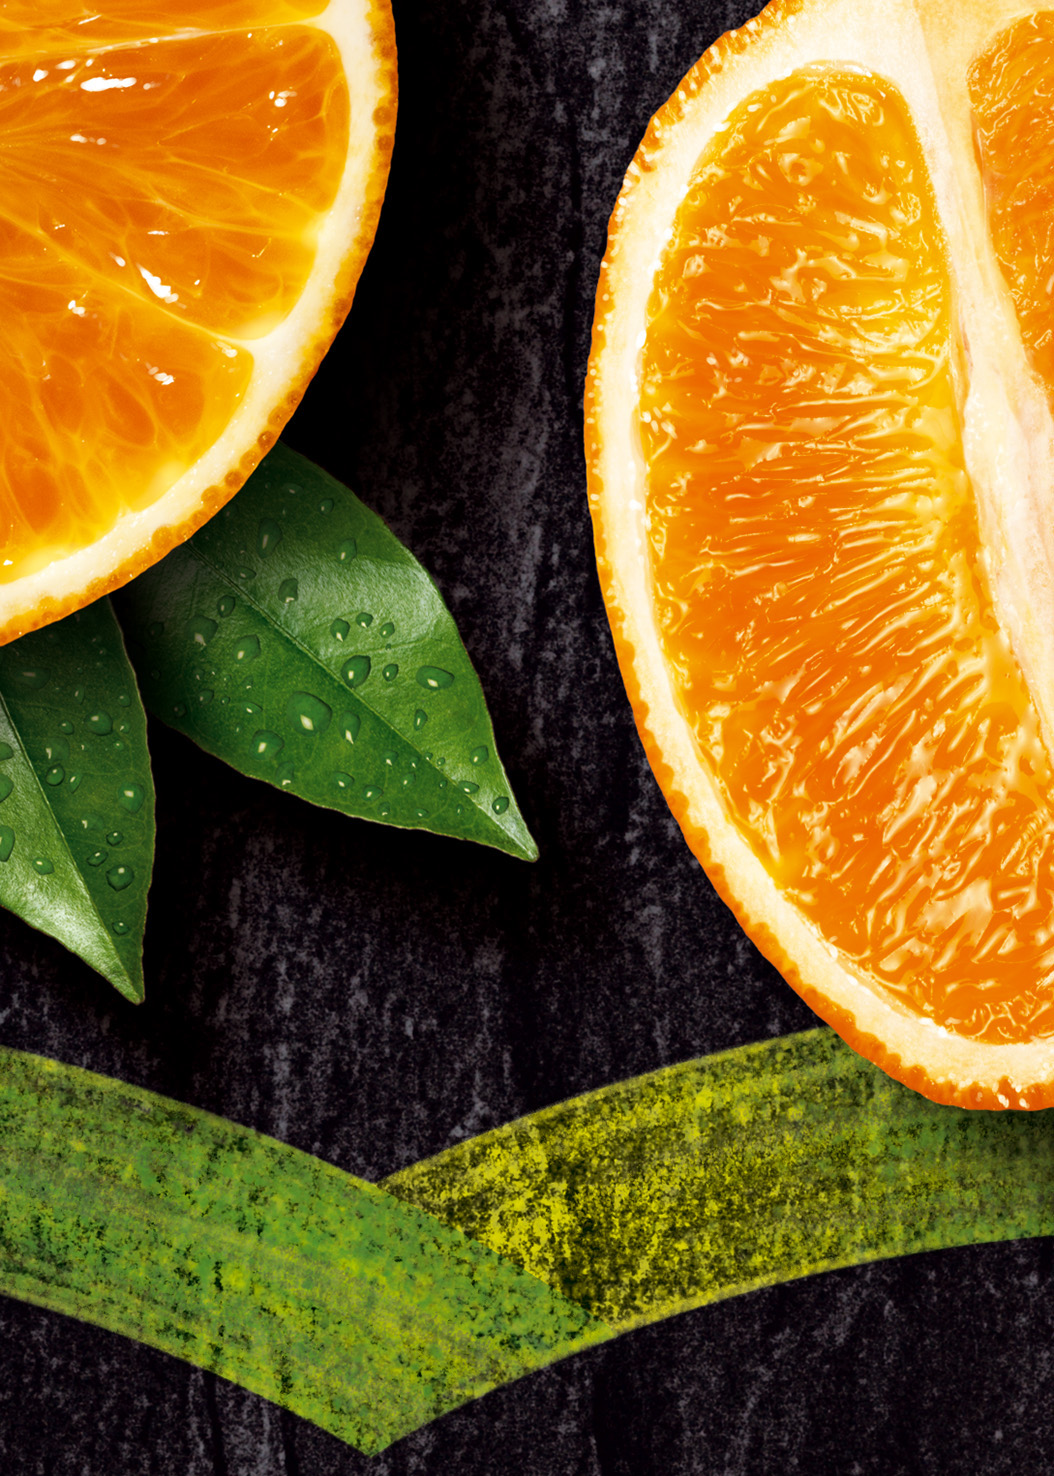 Oranges: Benefits, Nutrition, and Facts